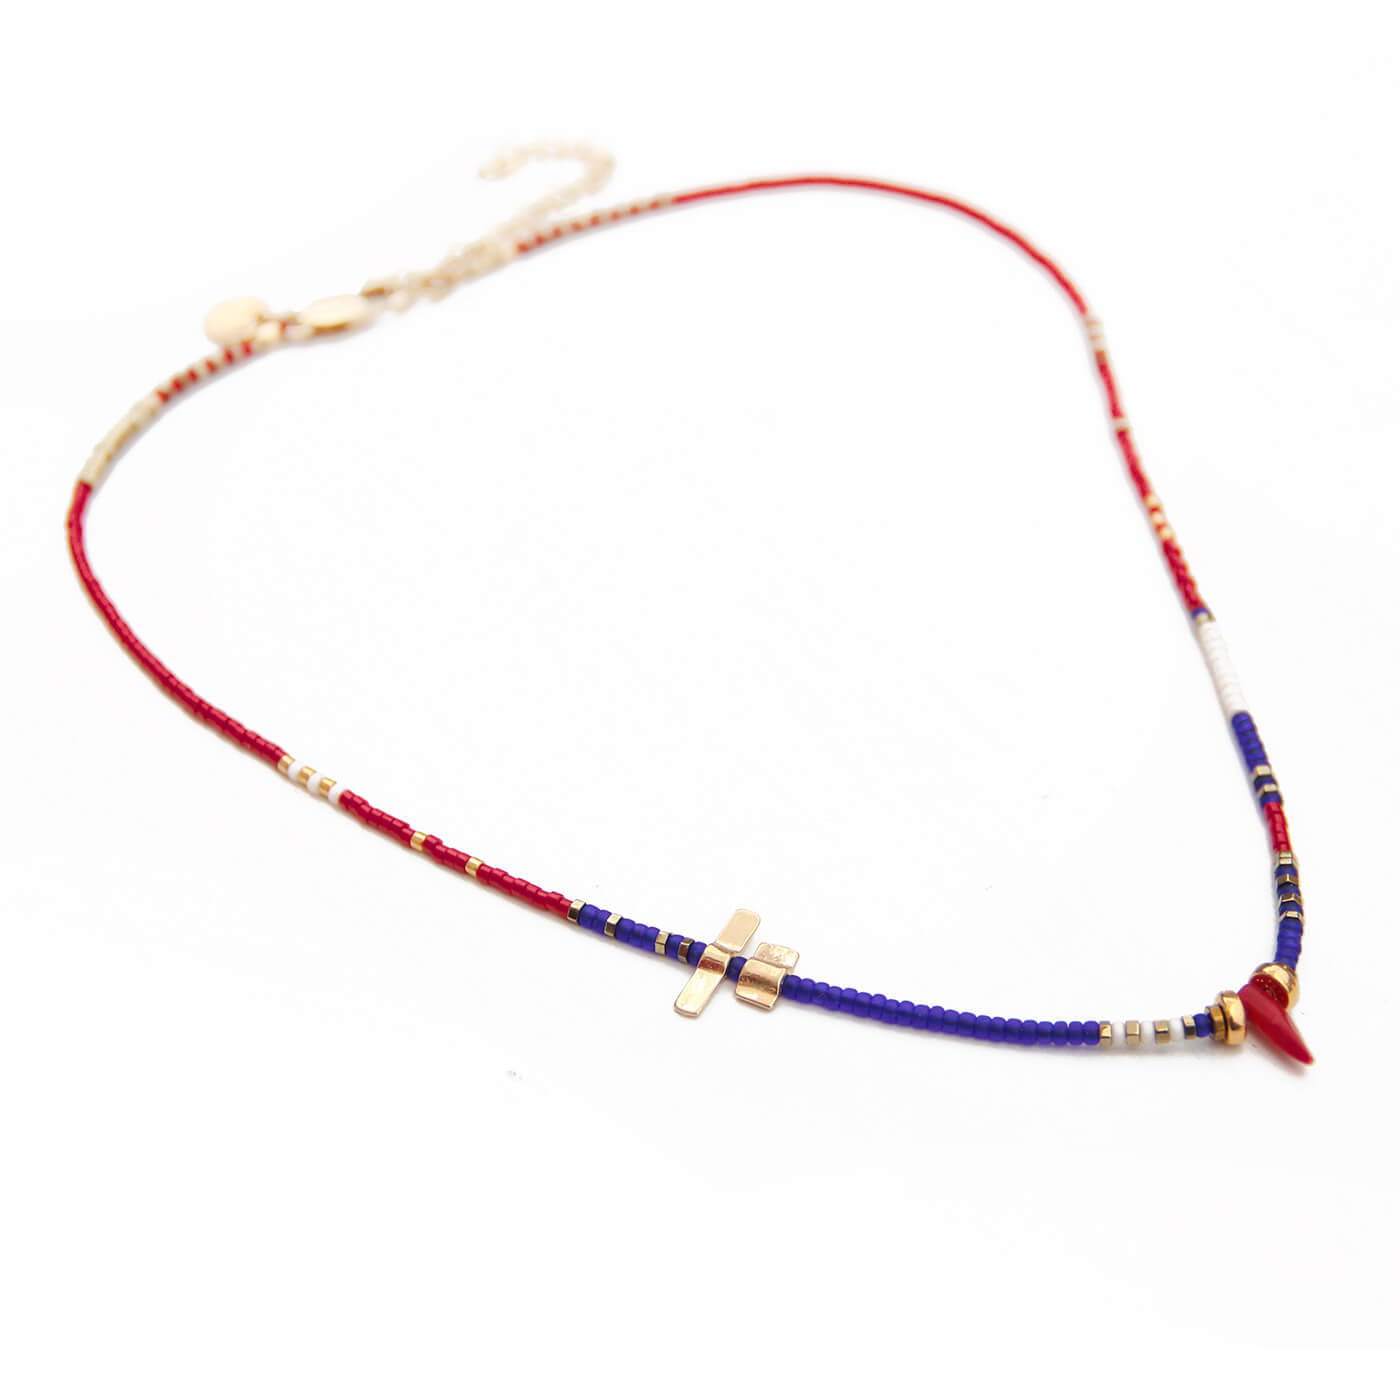 Noel Necklace – Goldplated, blue, red